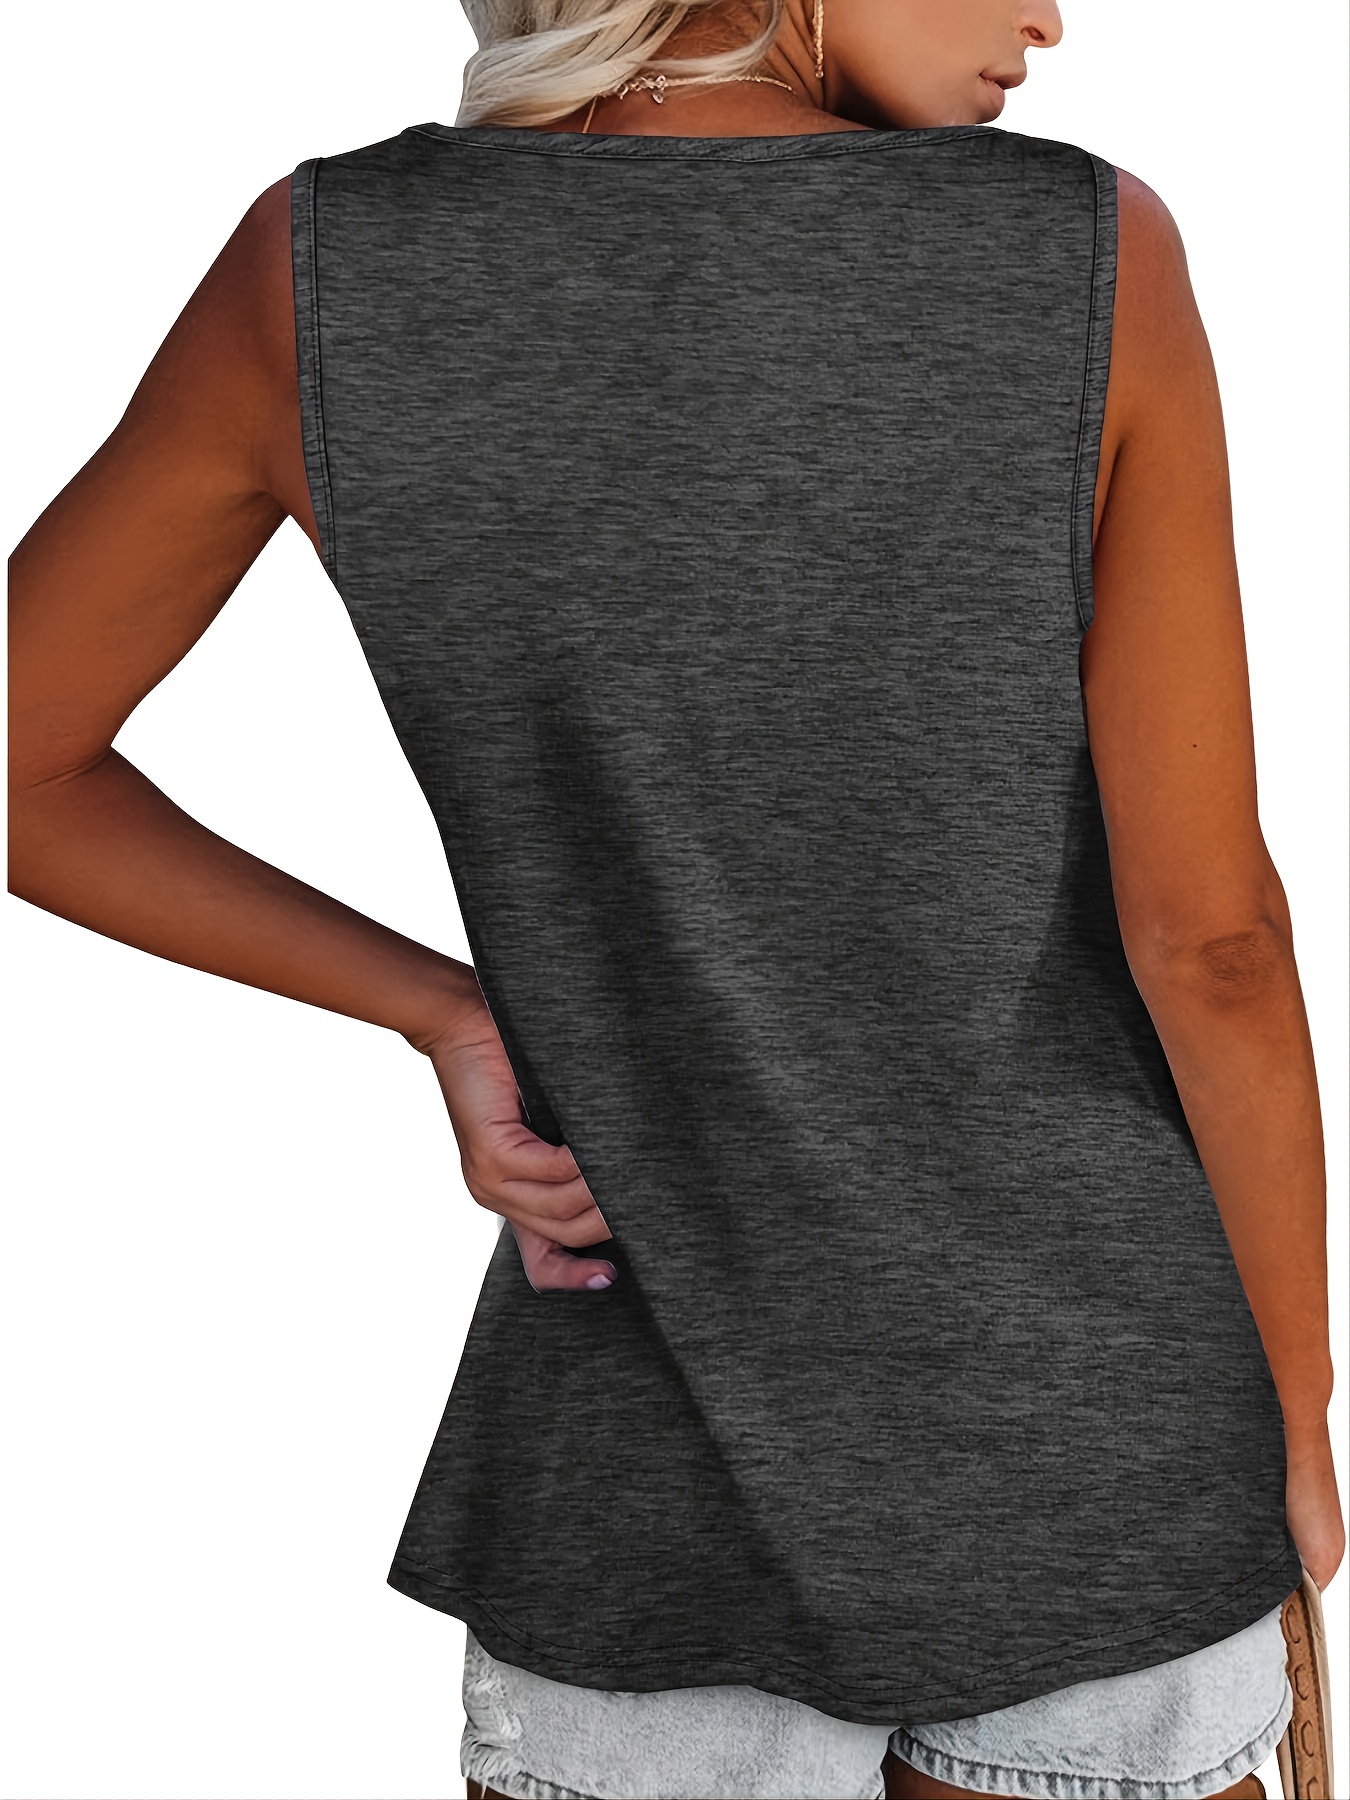  Black Tank Tops For Women Casual Loose Solid V Neck